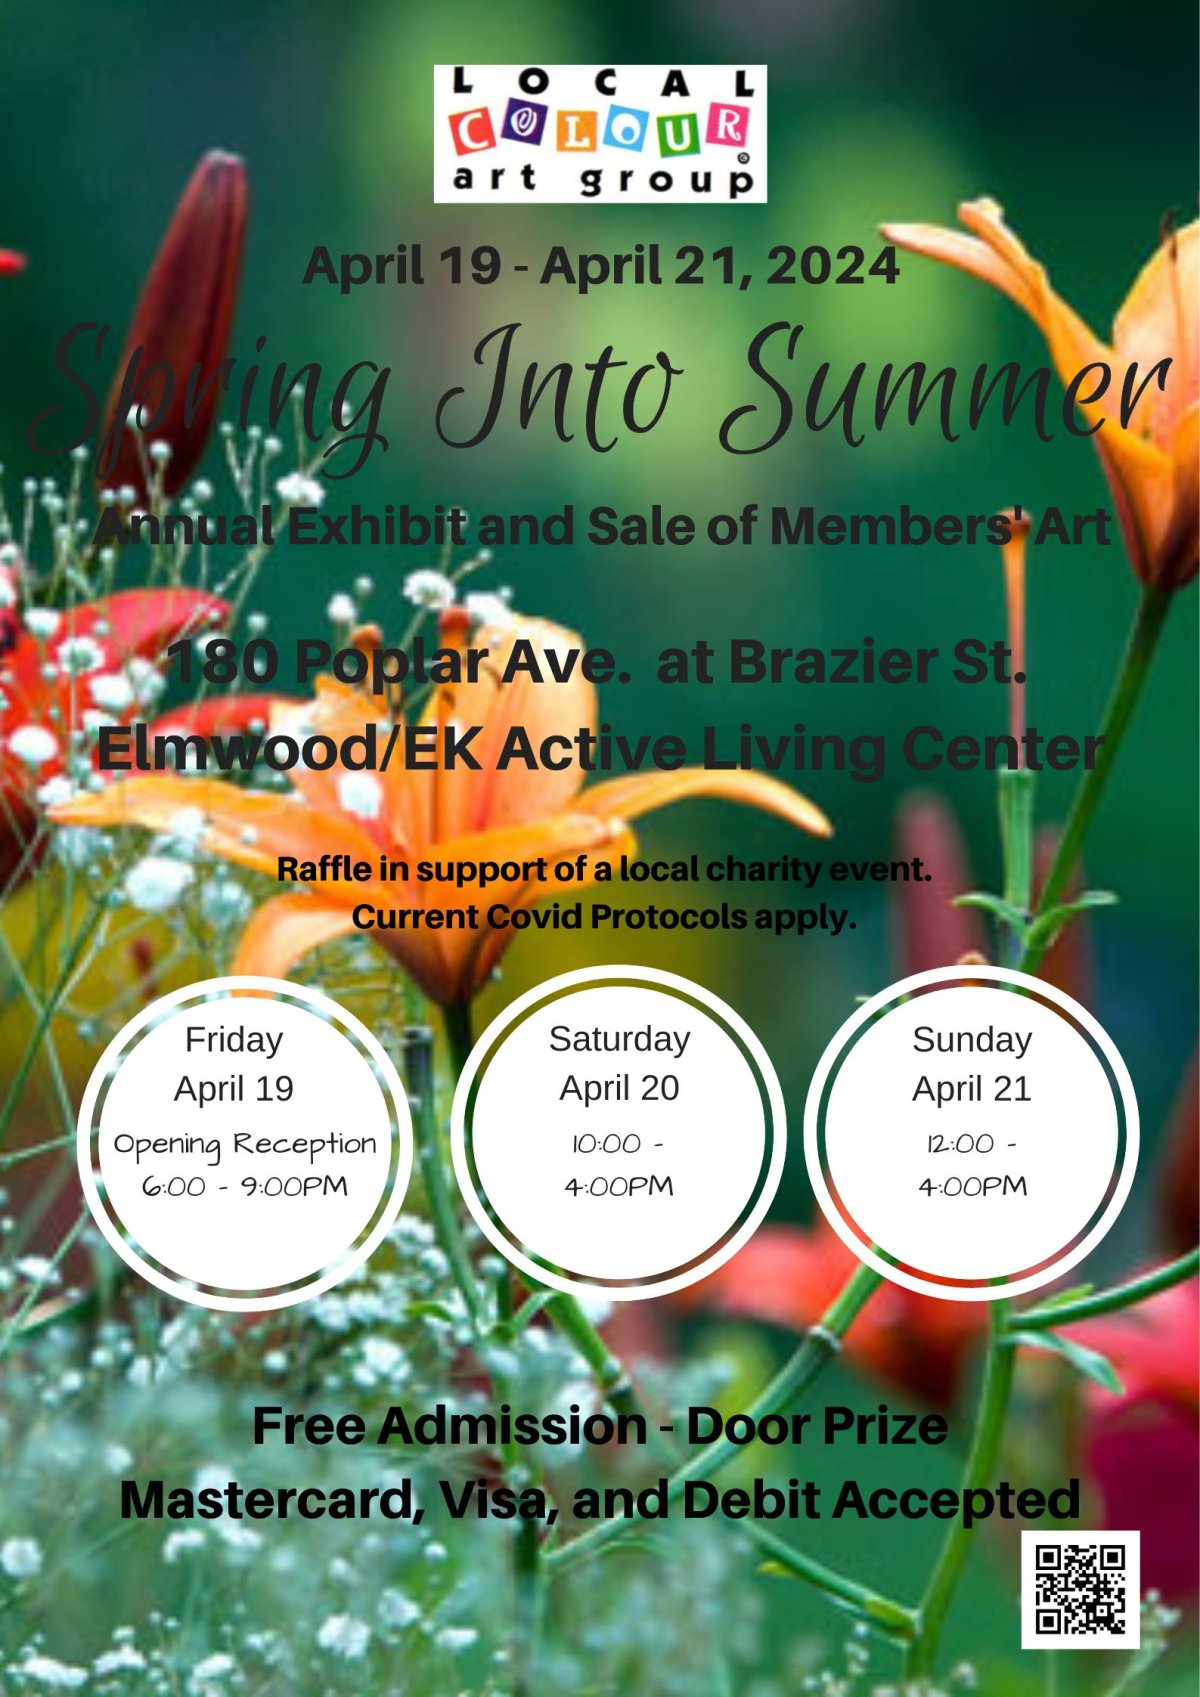 Spring into Summer Art Show and Sale - image